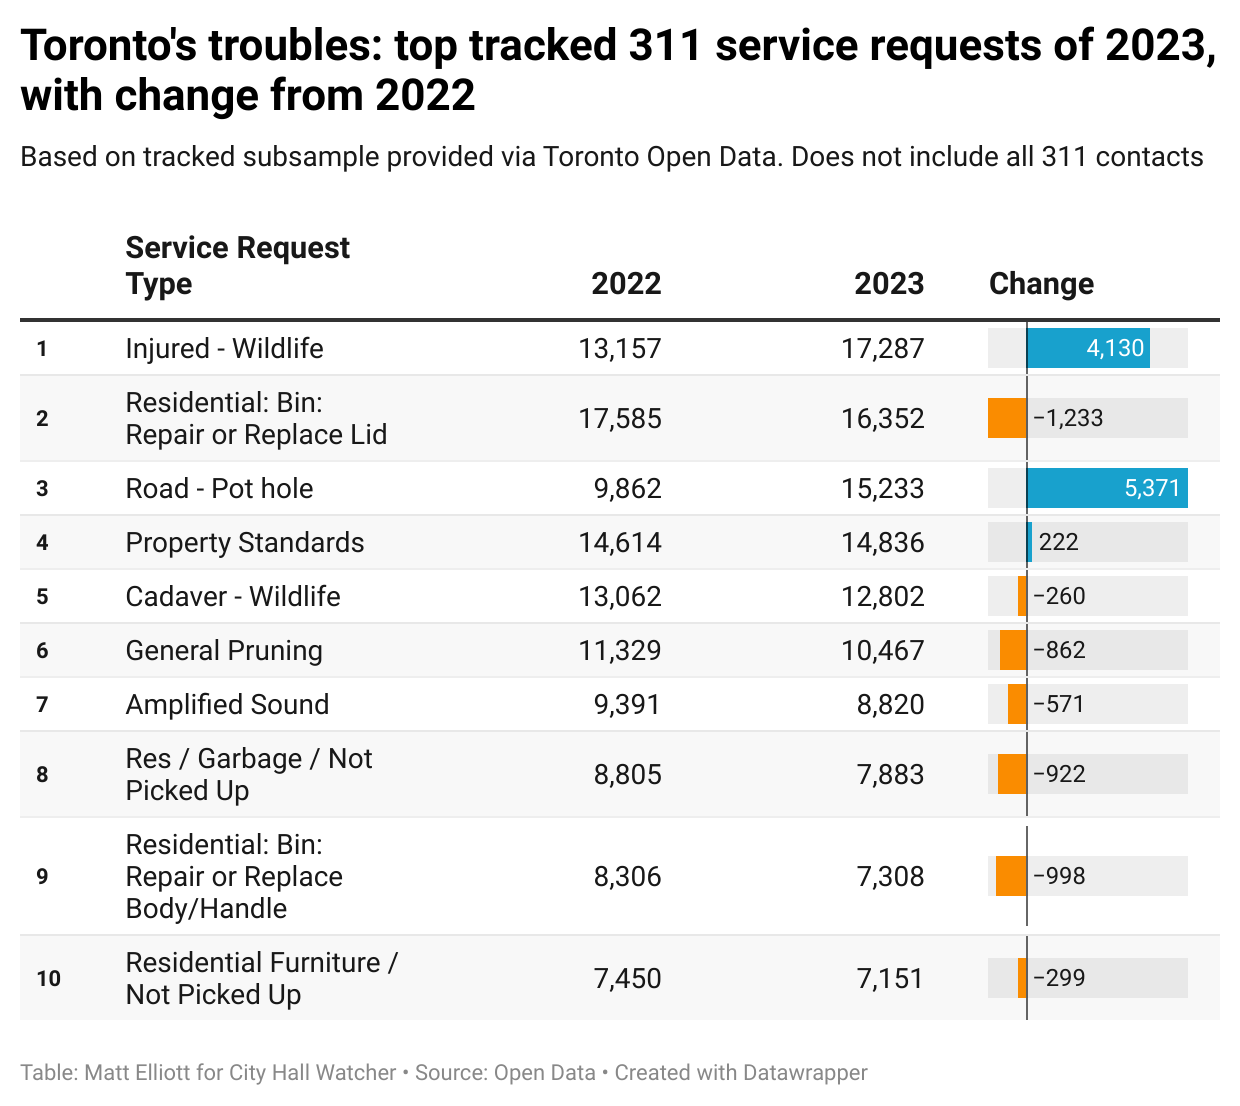 Data table of top 10 311 service requests in 2023, with change from 2022